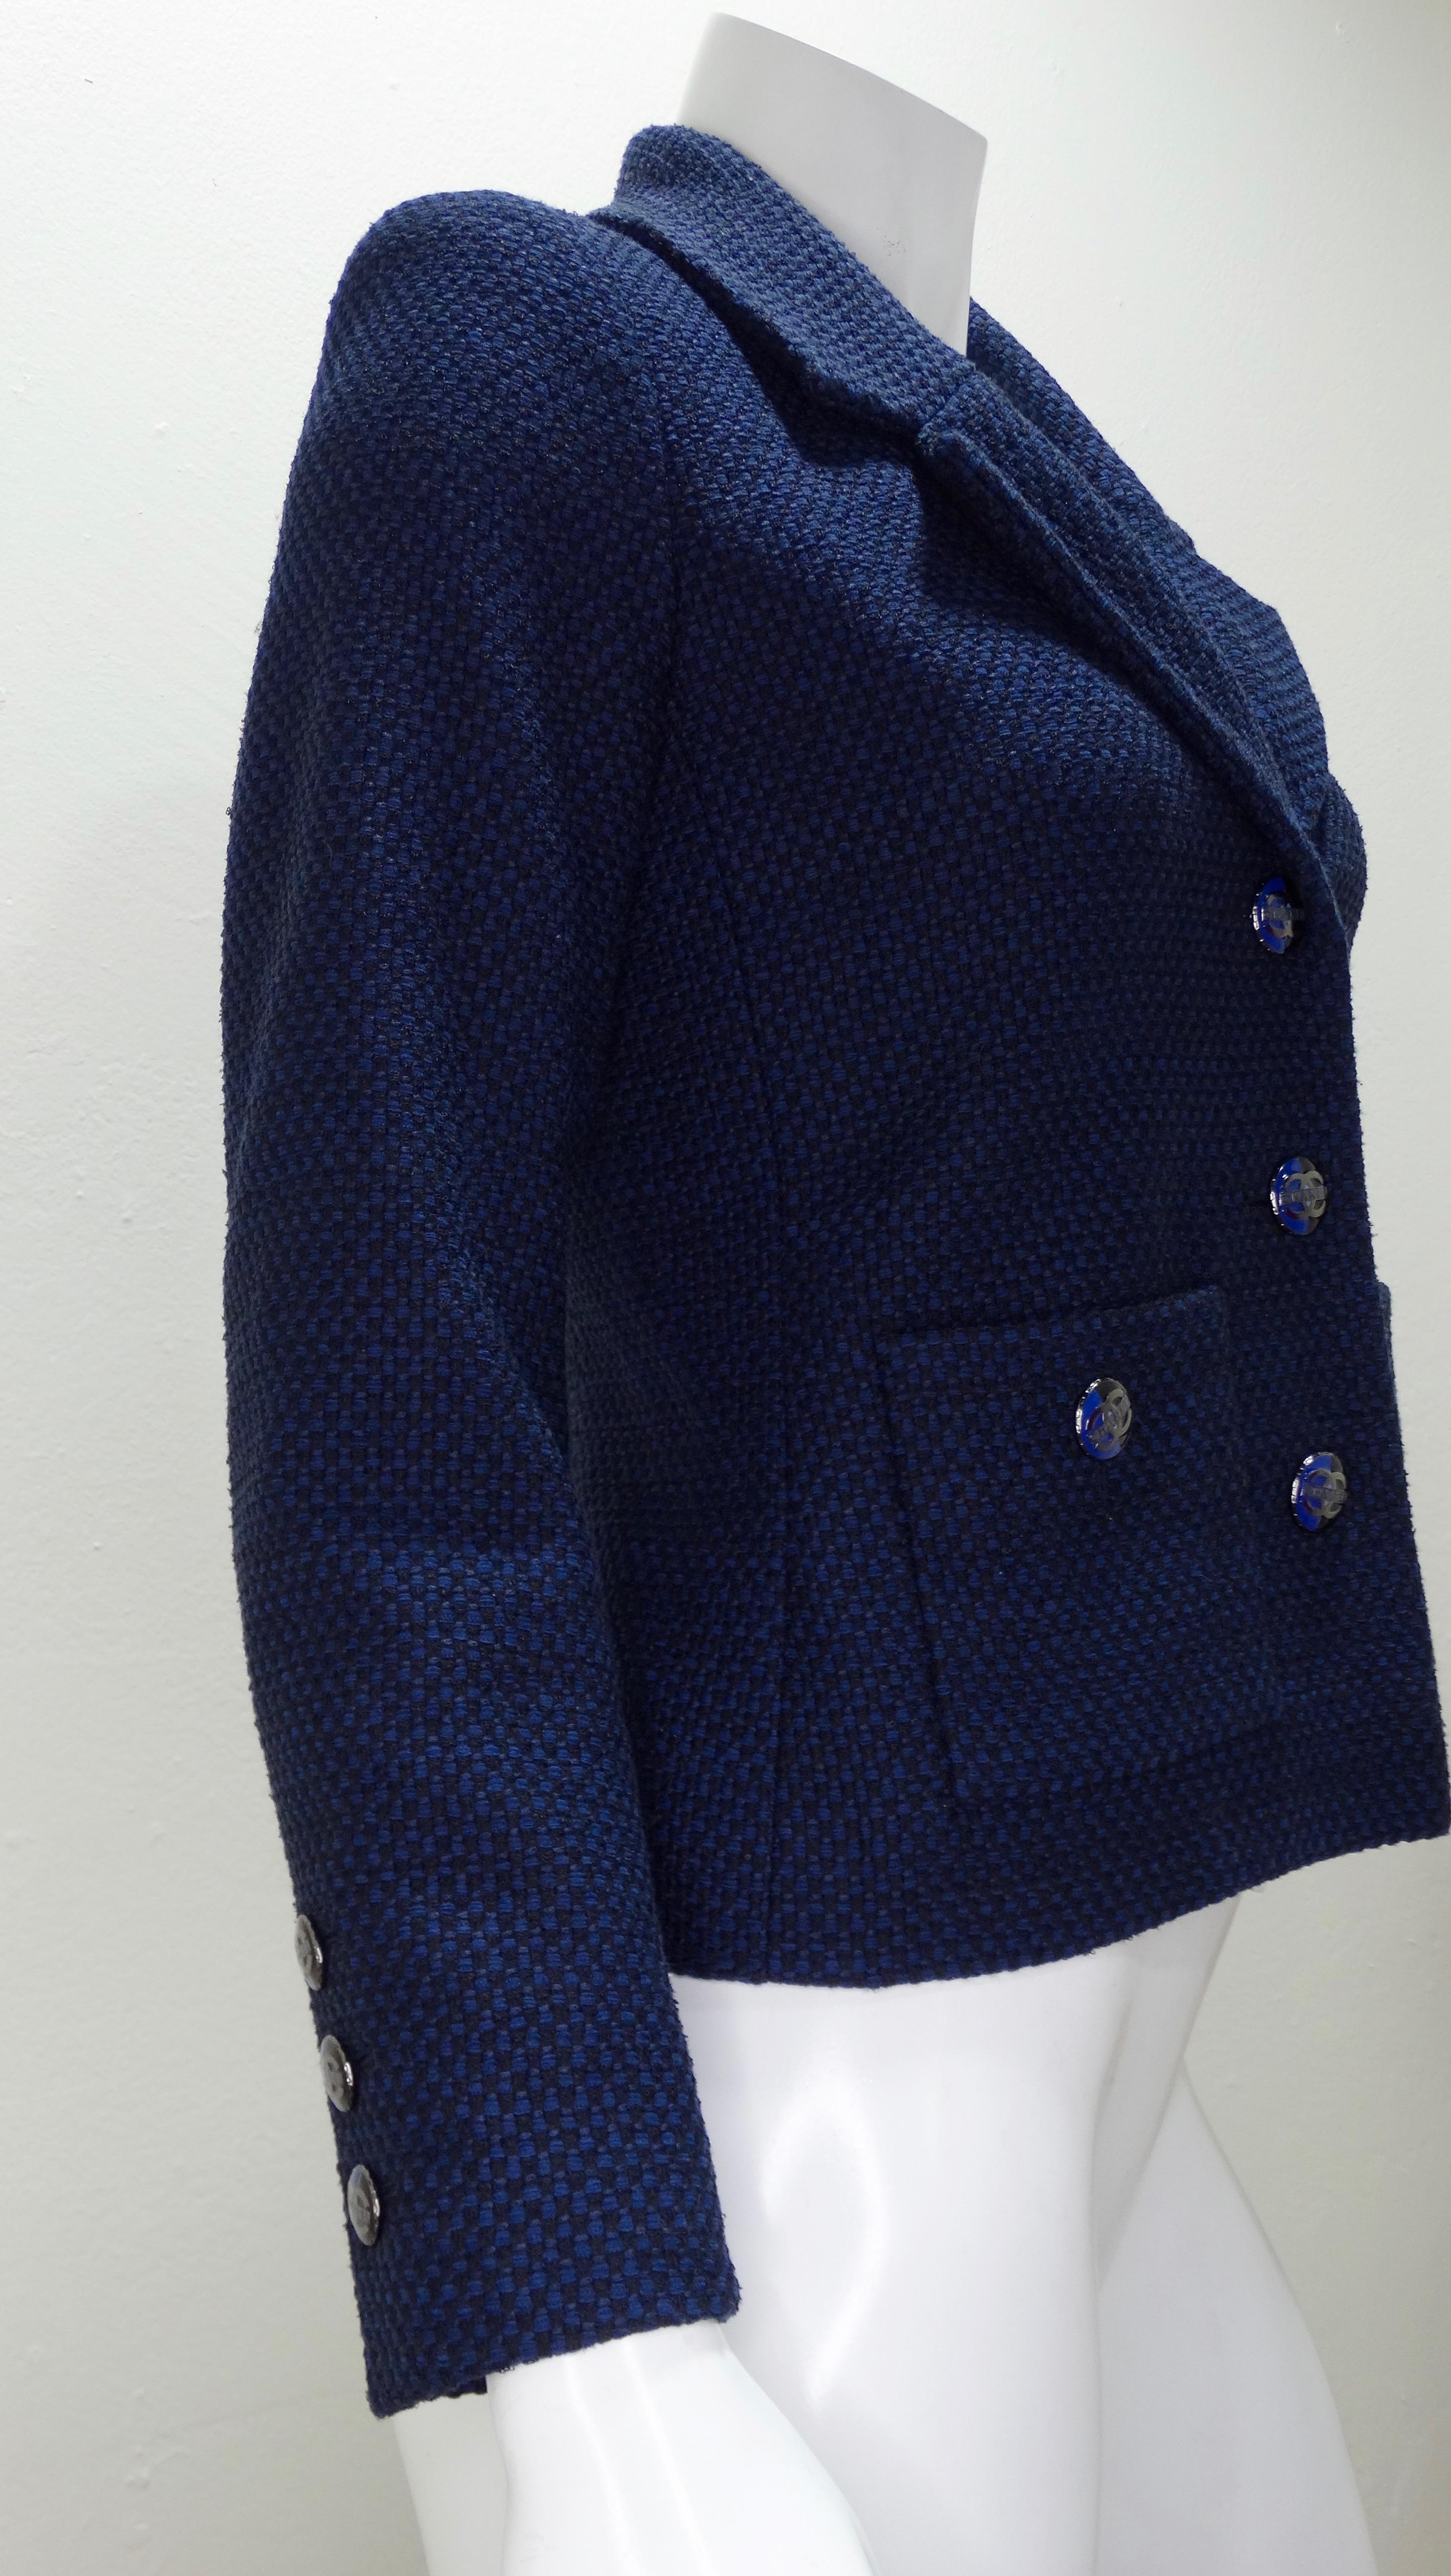 For all the Chanel lovers! Circa recent 2000s, this black and navy woven blazer features a deep v-neck with a notched collar, two front square pockets, and matching enamel CC buttons. Interior is lined with Chanel fabric. Timeless and classic, this